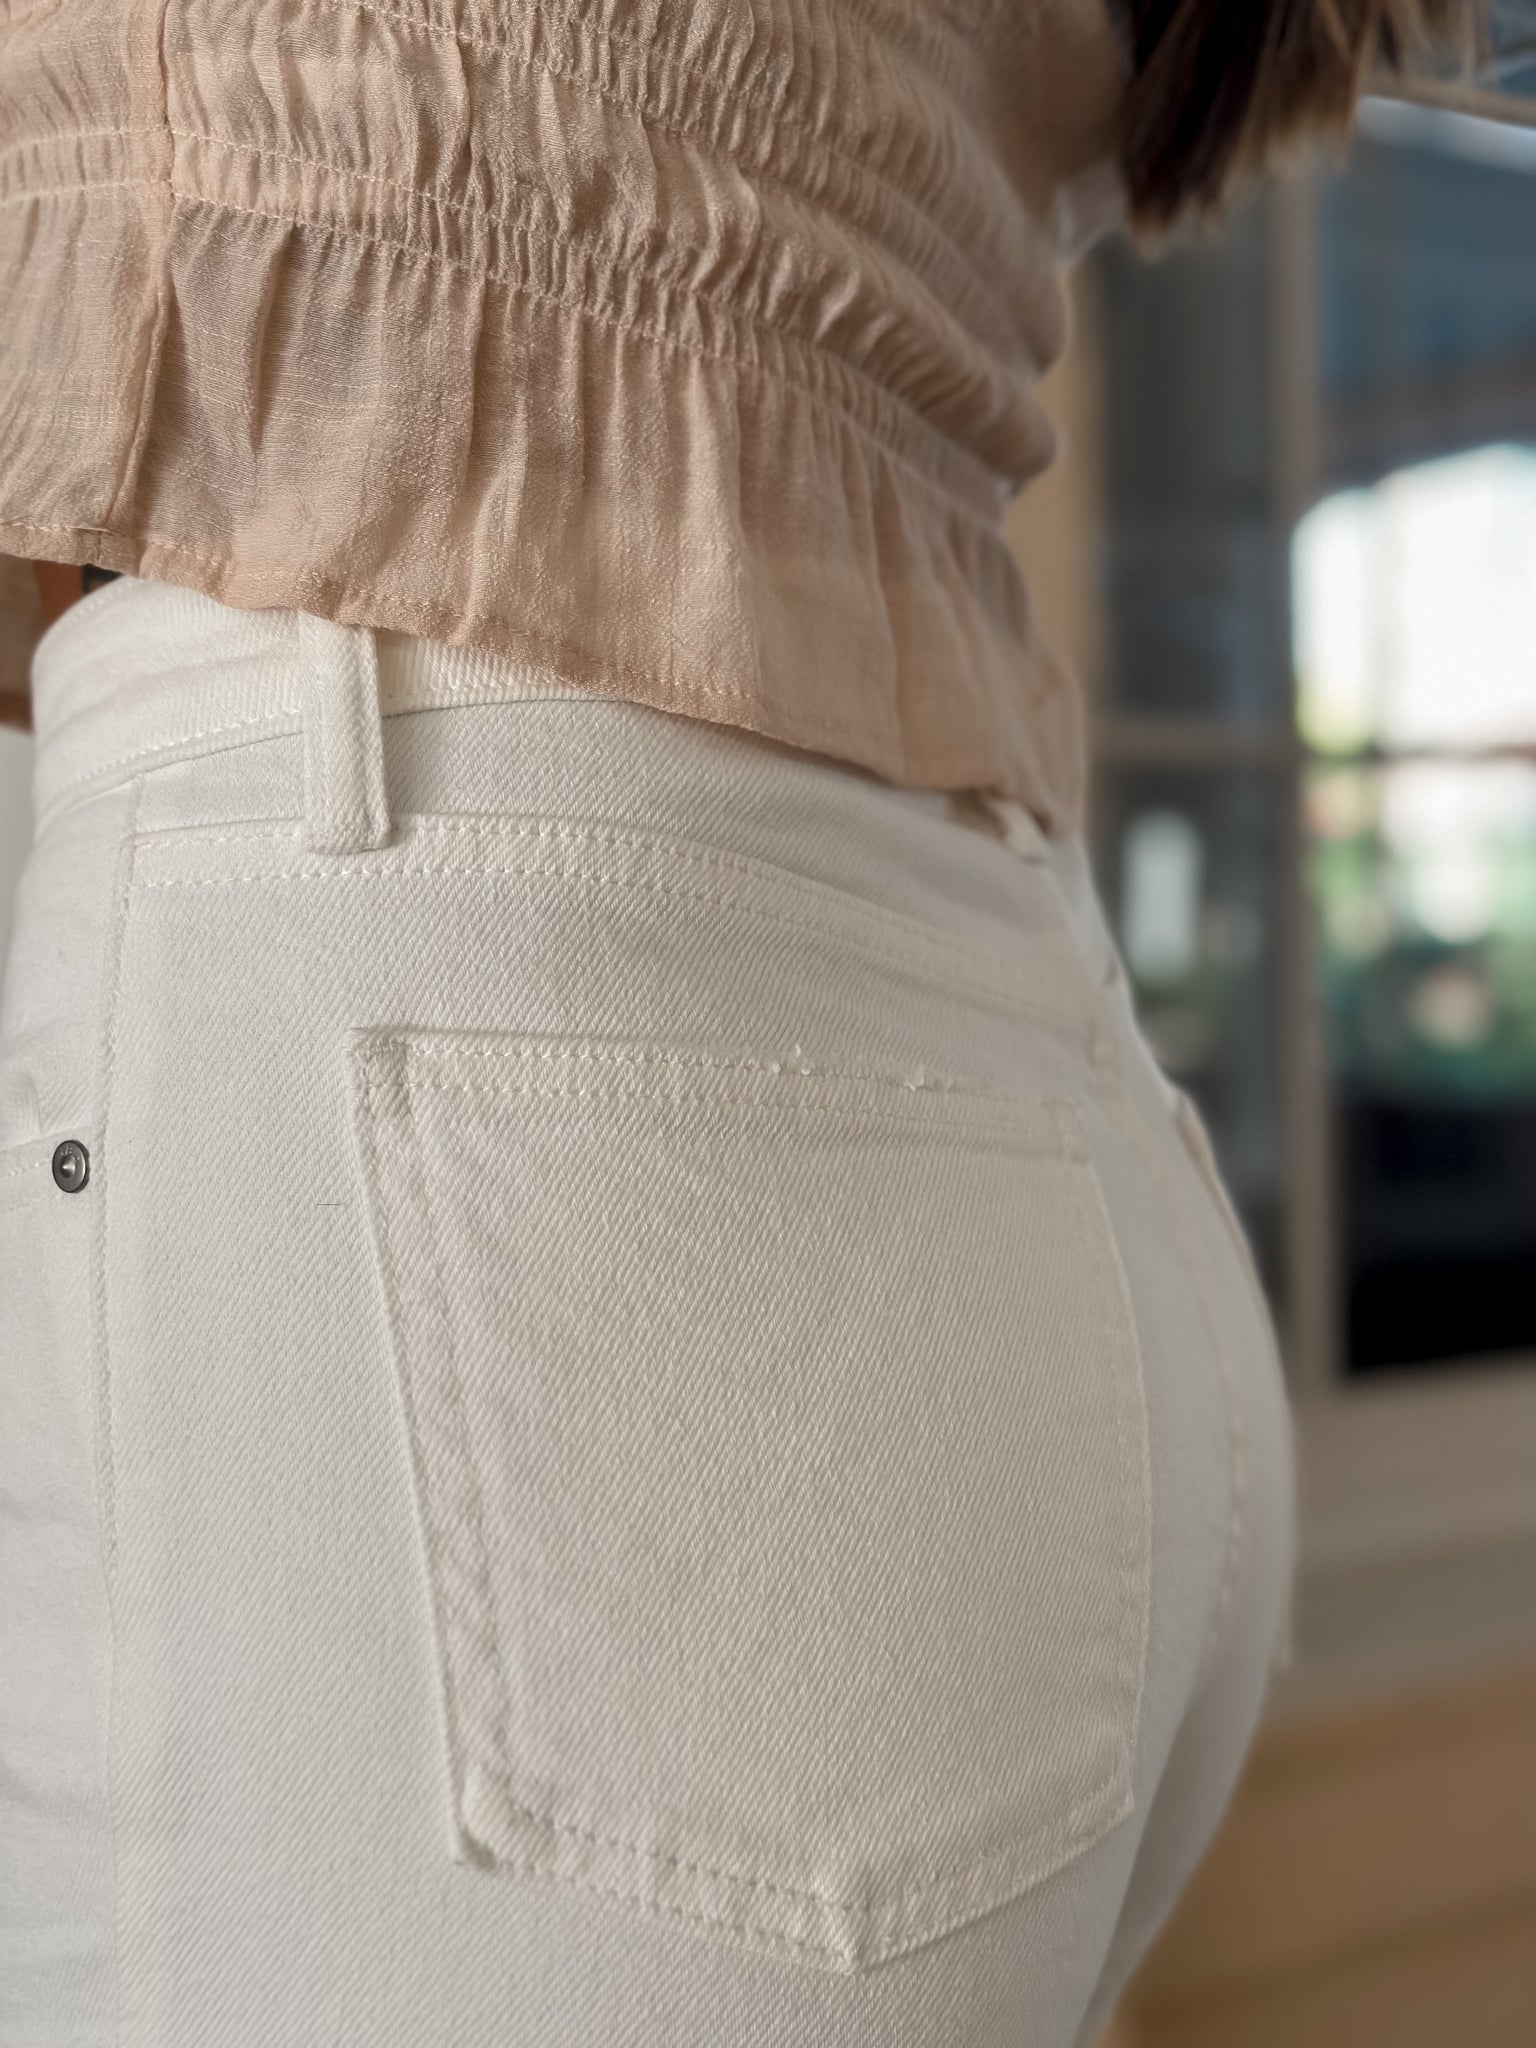 High Rise Straight White Jeans